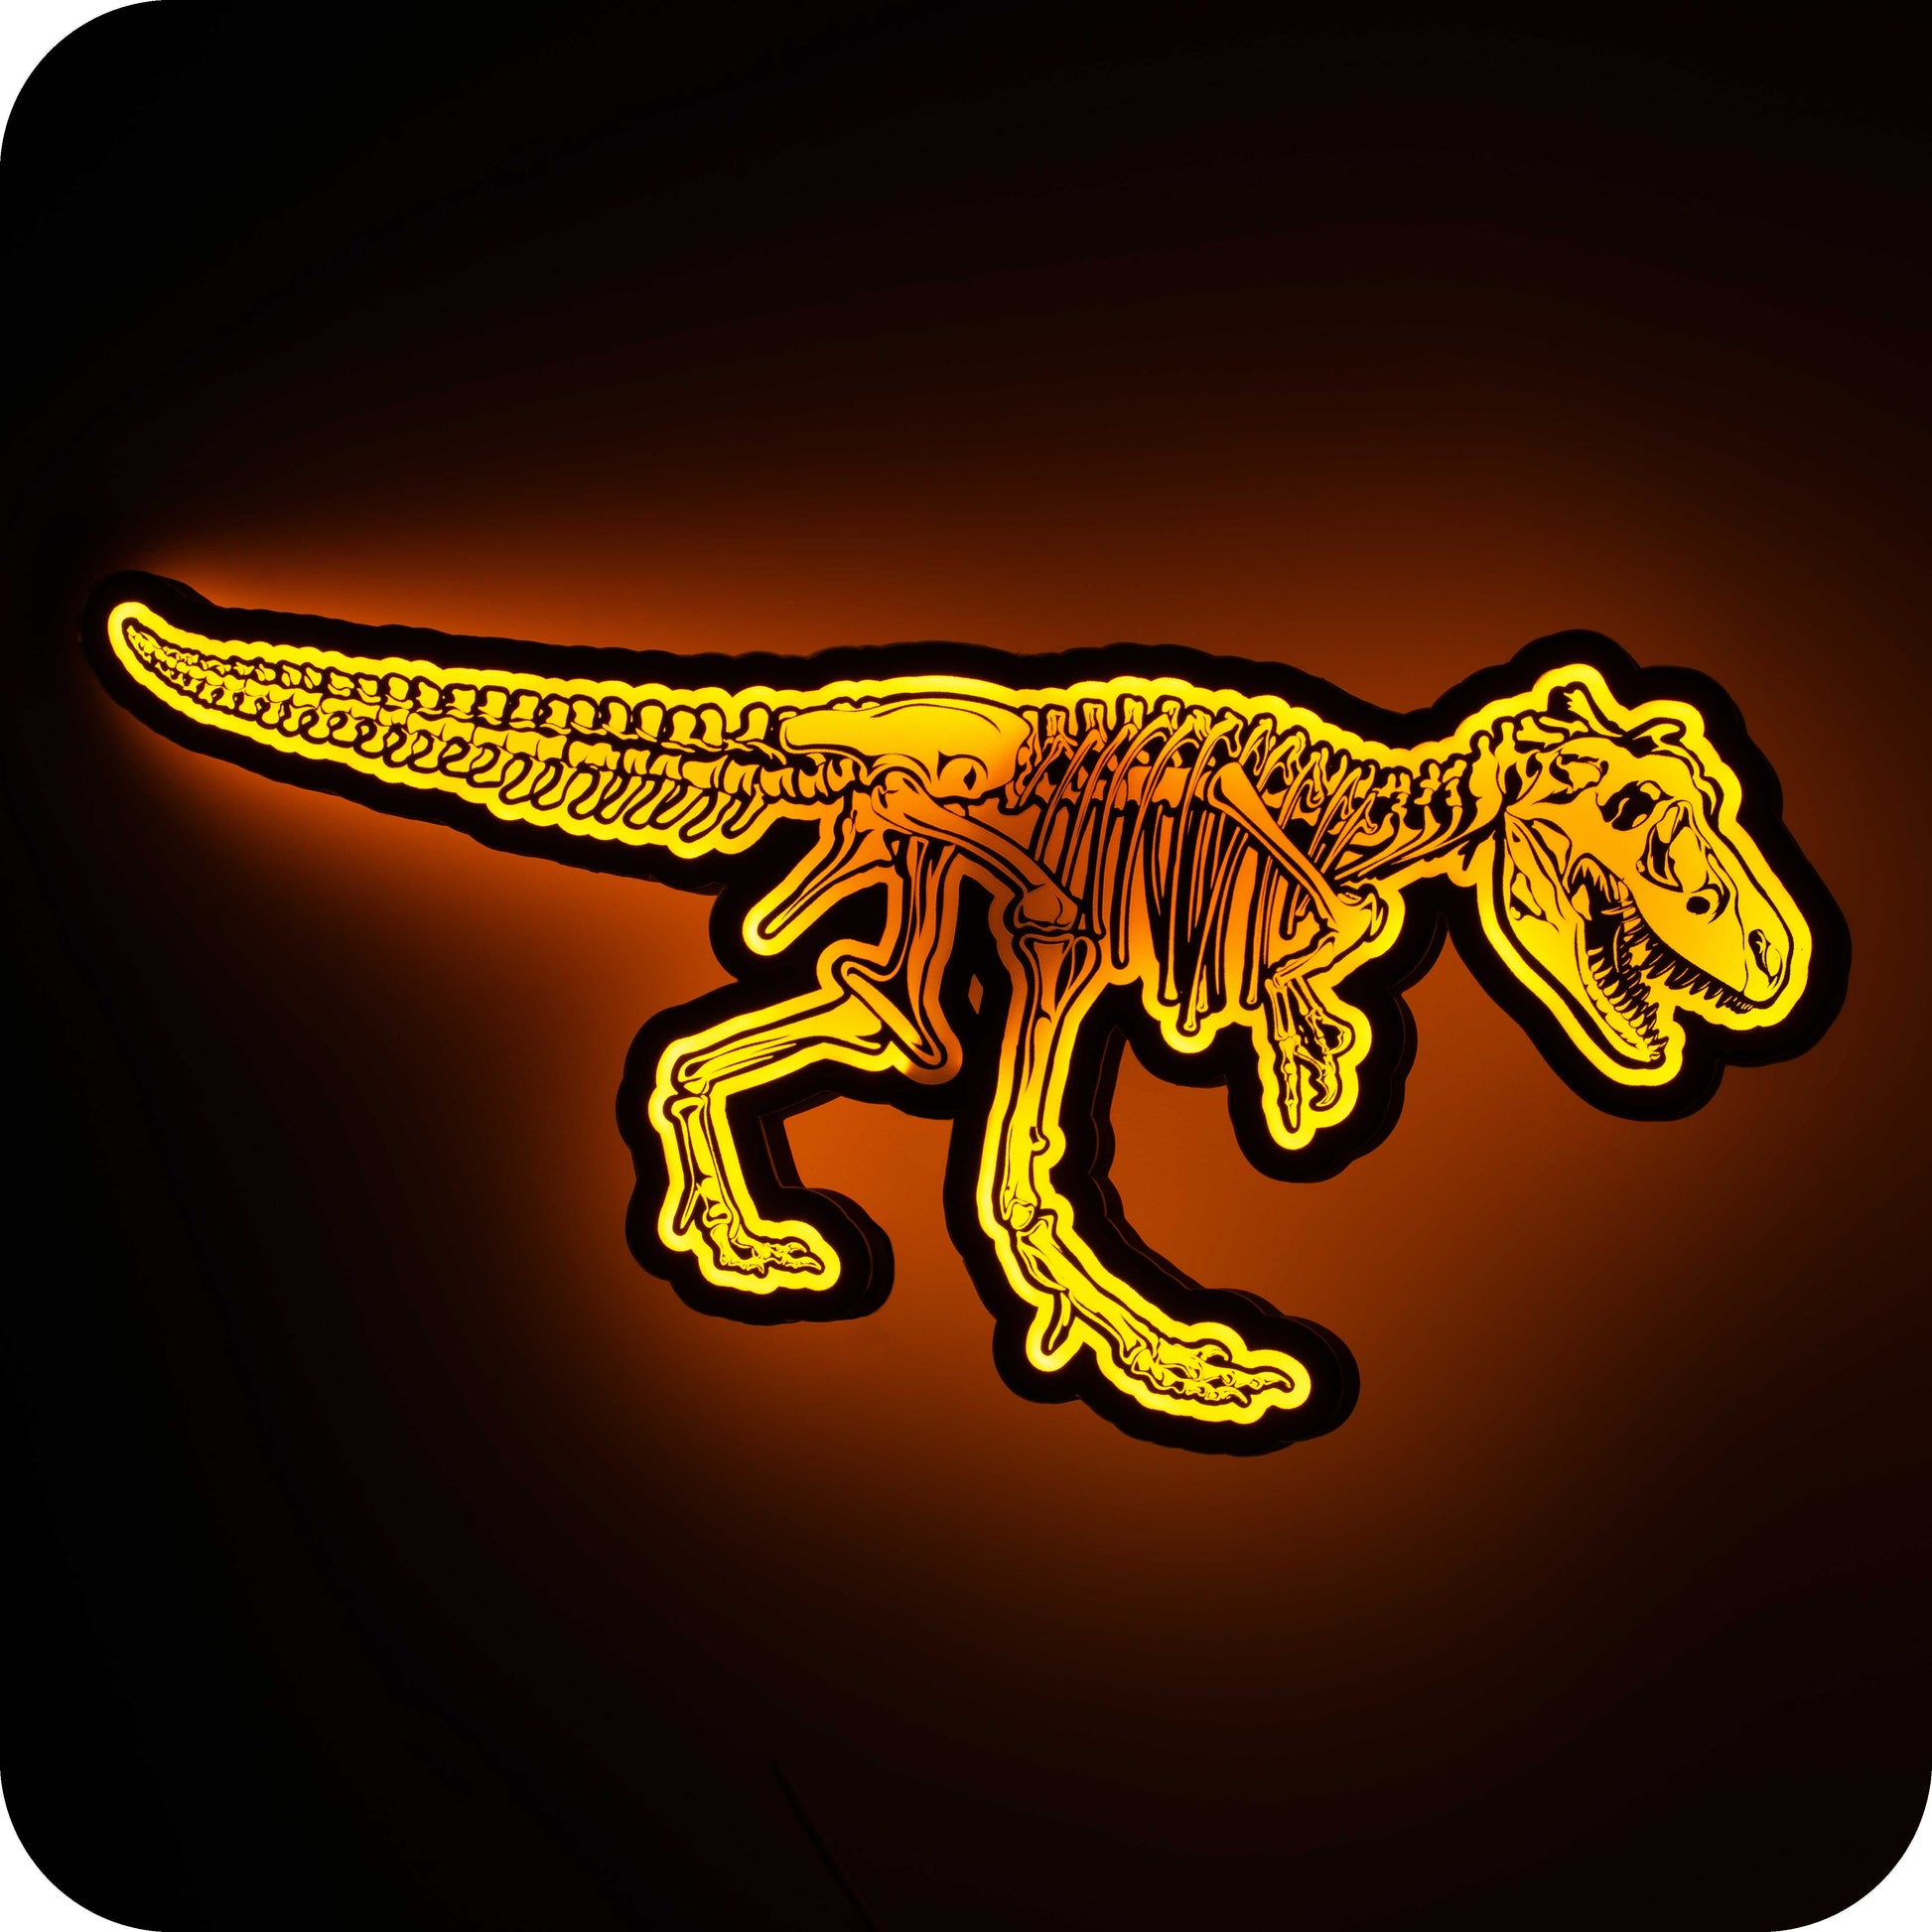 image of a 3d wall mounted acrylic light, backlit by orange led lights, featuring an epic dinosaur themed illustration of a t-rex skeleton.